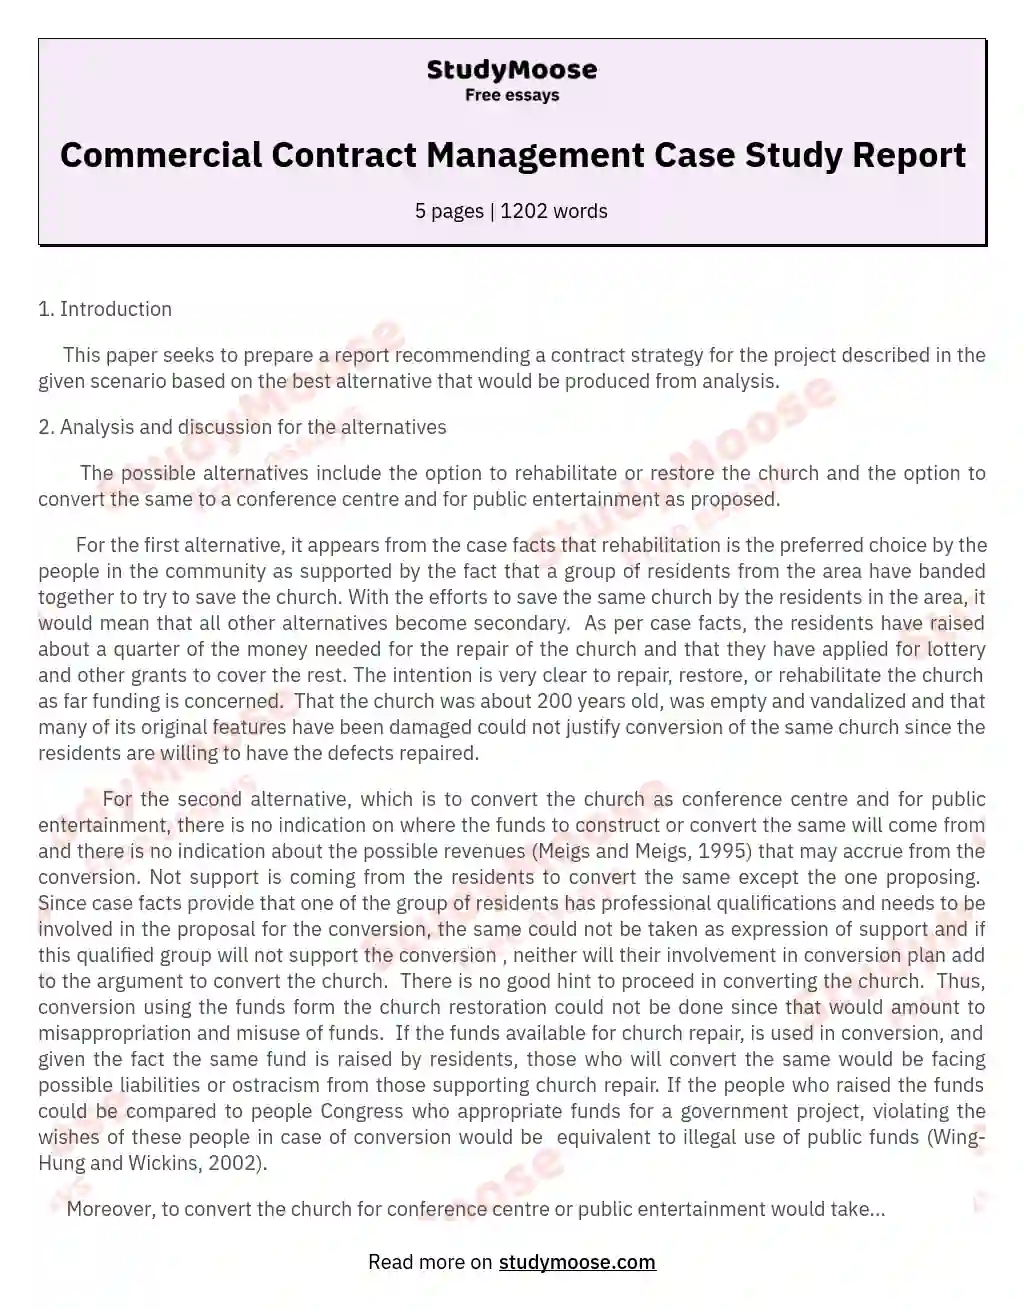 Commercial Contract Management Case Study Report essay